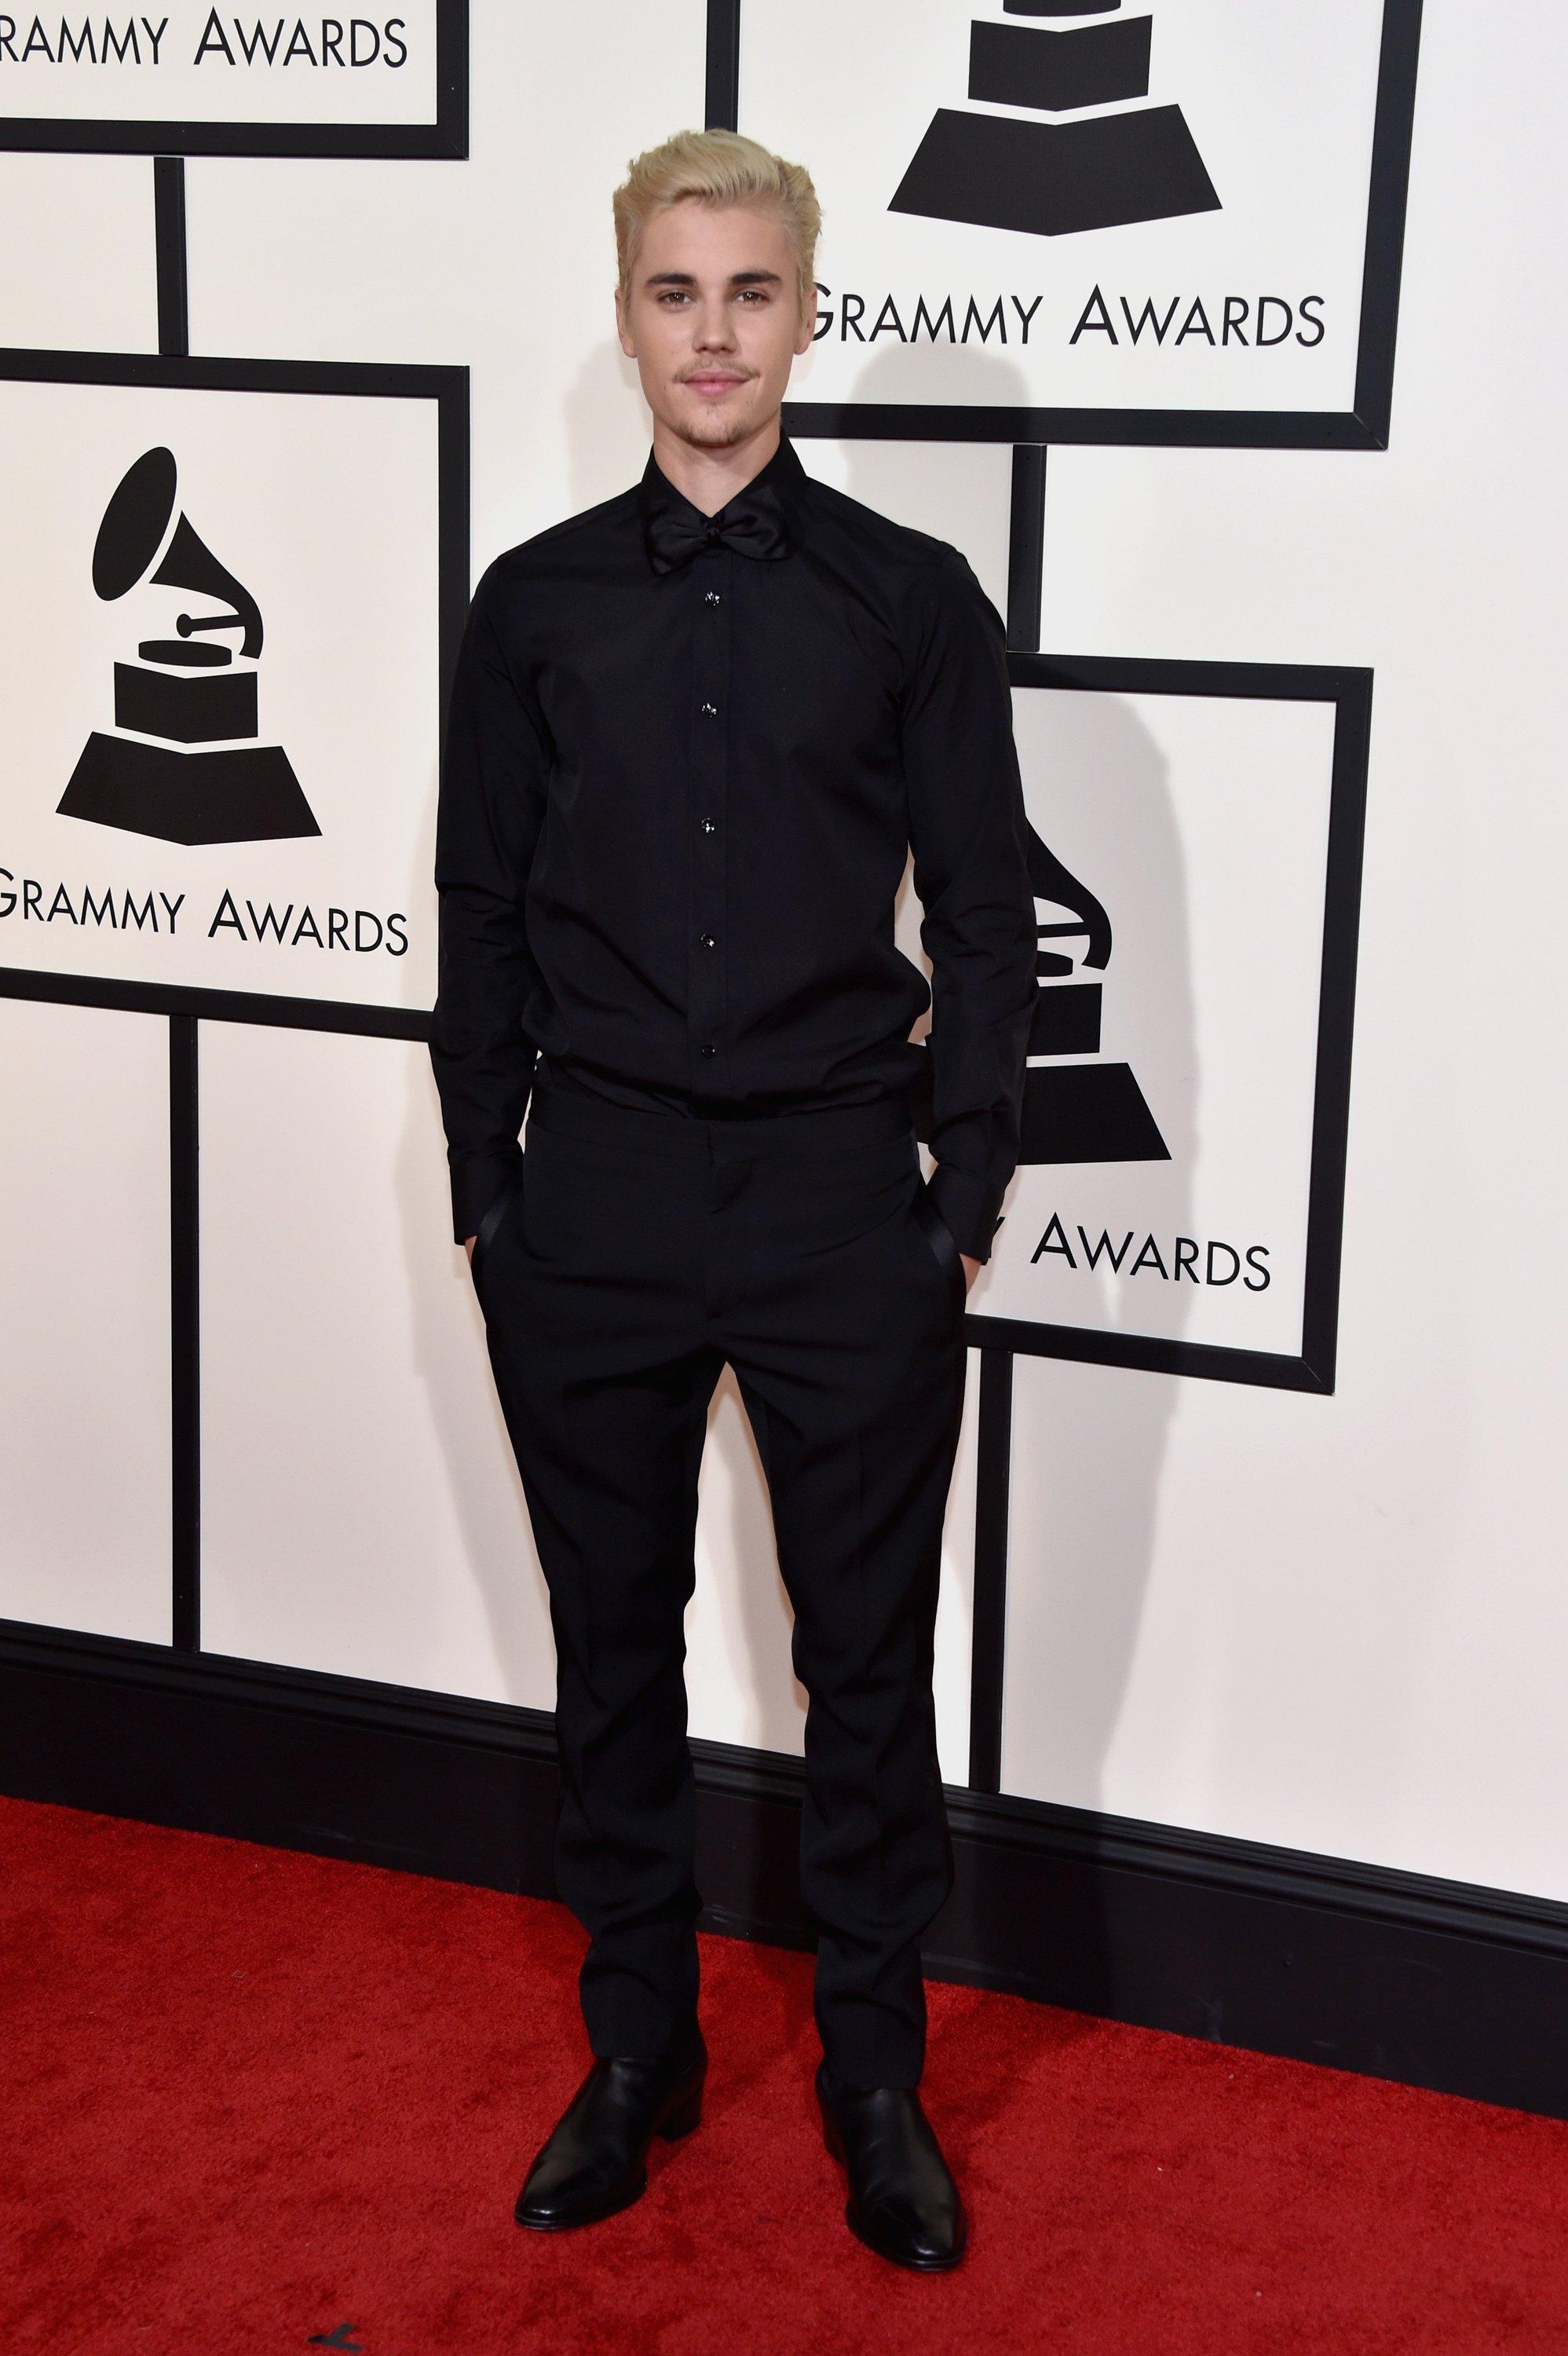 Justin Bieber at the 58th GRAMMY Awards